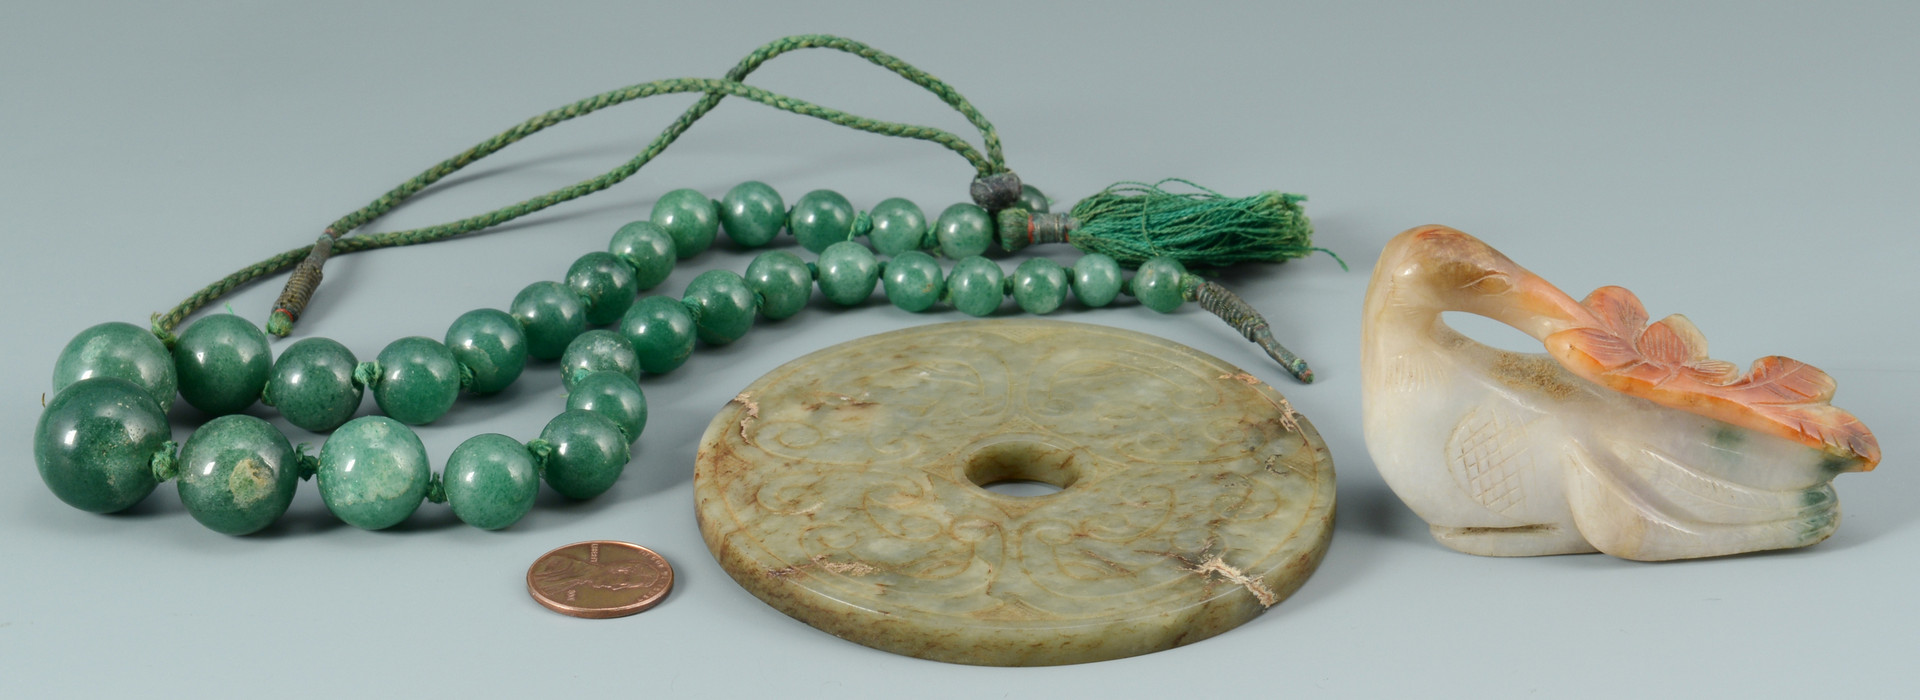 Lot 14: 3 Chinese Jade Items: Stork, Beads, Disc